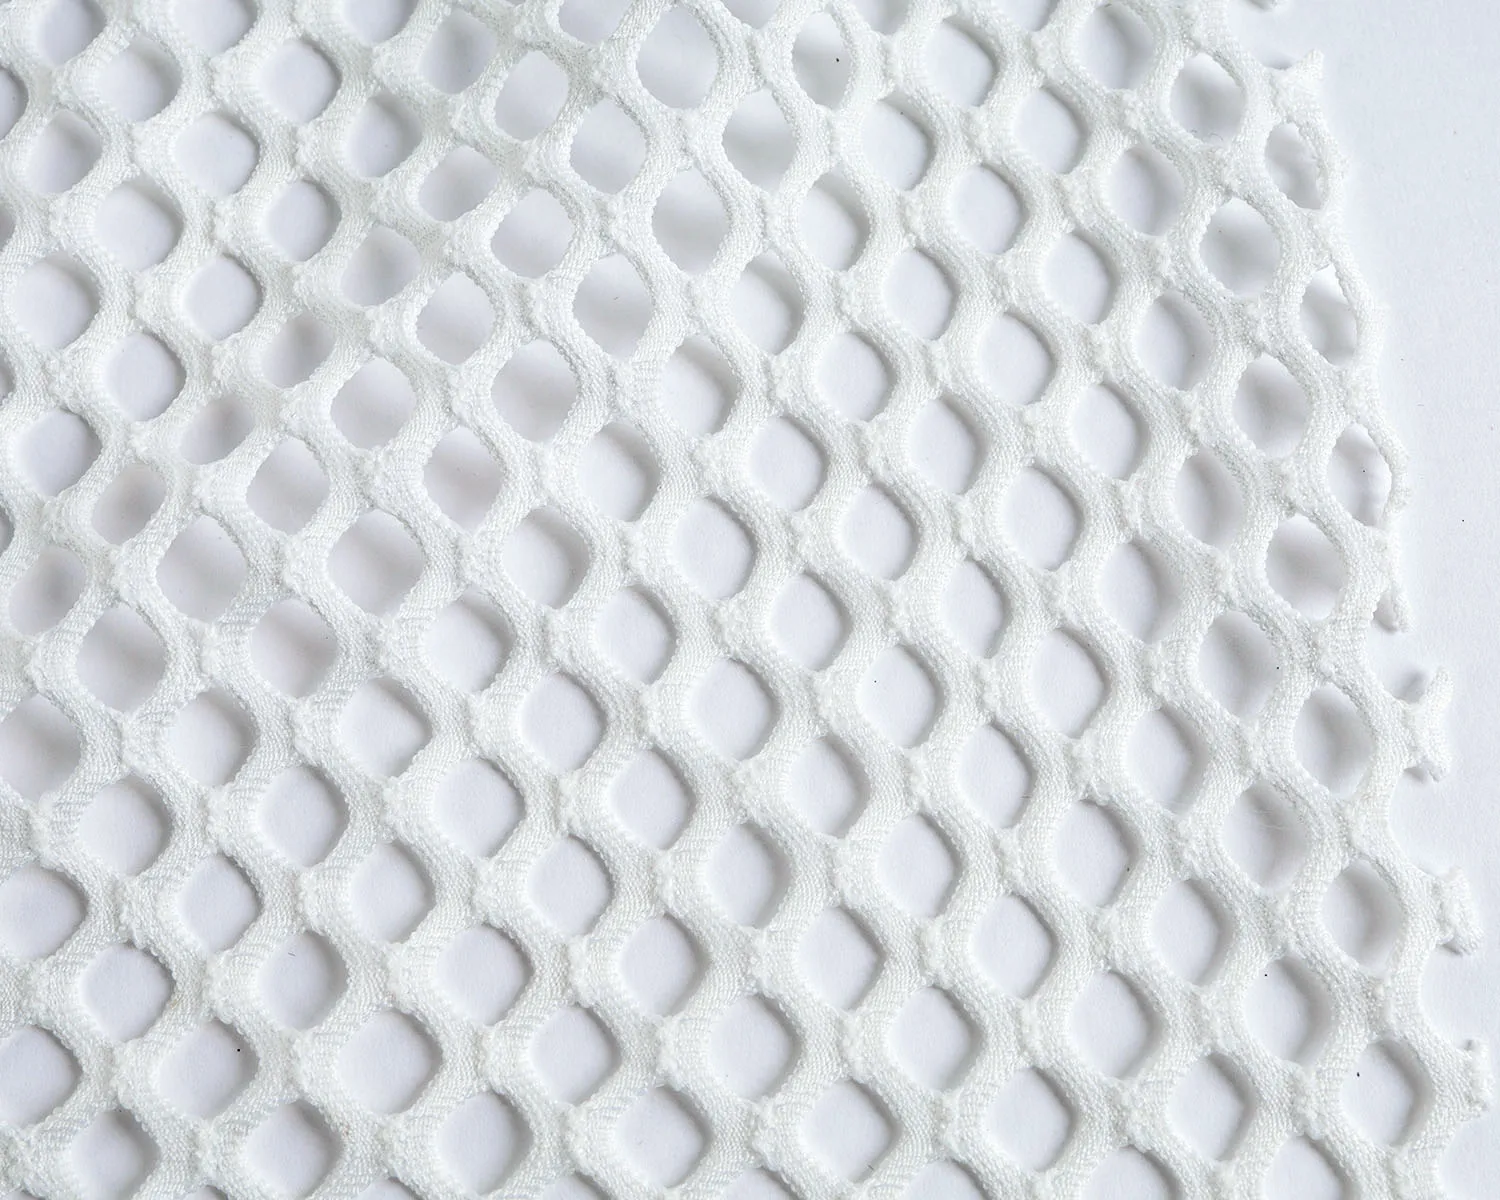 https://ae01.alicdn.com/kf/H0d1d0064d6b347d891d90a744667be01L/Diamond-Holes-Mesh-Polyester-Spandex-Fishnet-Fabric-for-clothing-making-DIY-165x50cm-sold-by-the-half.jpg